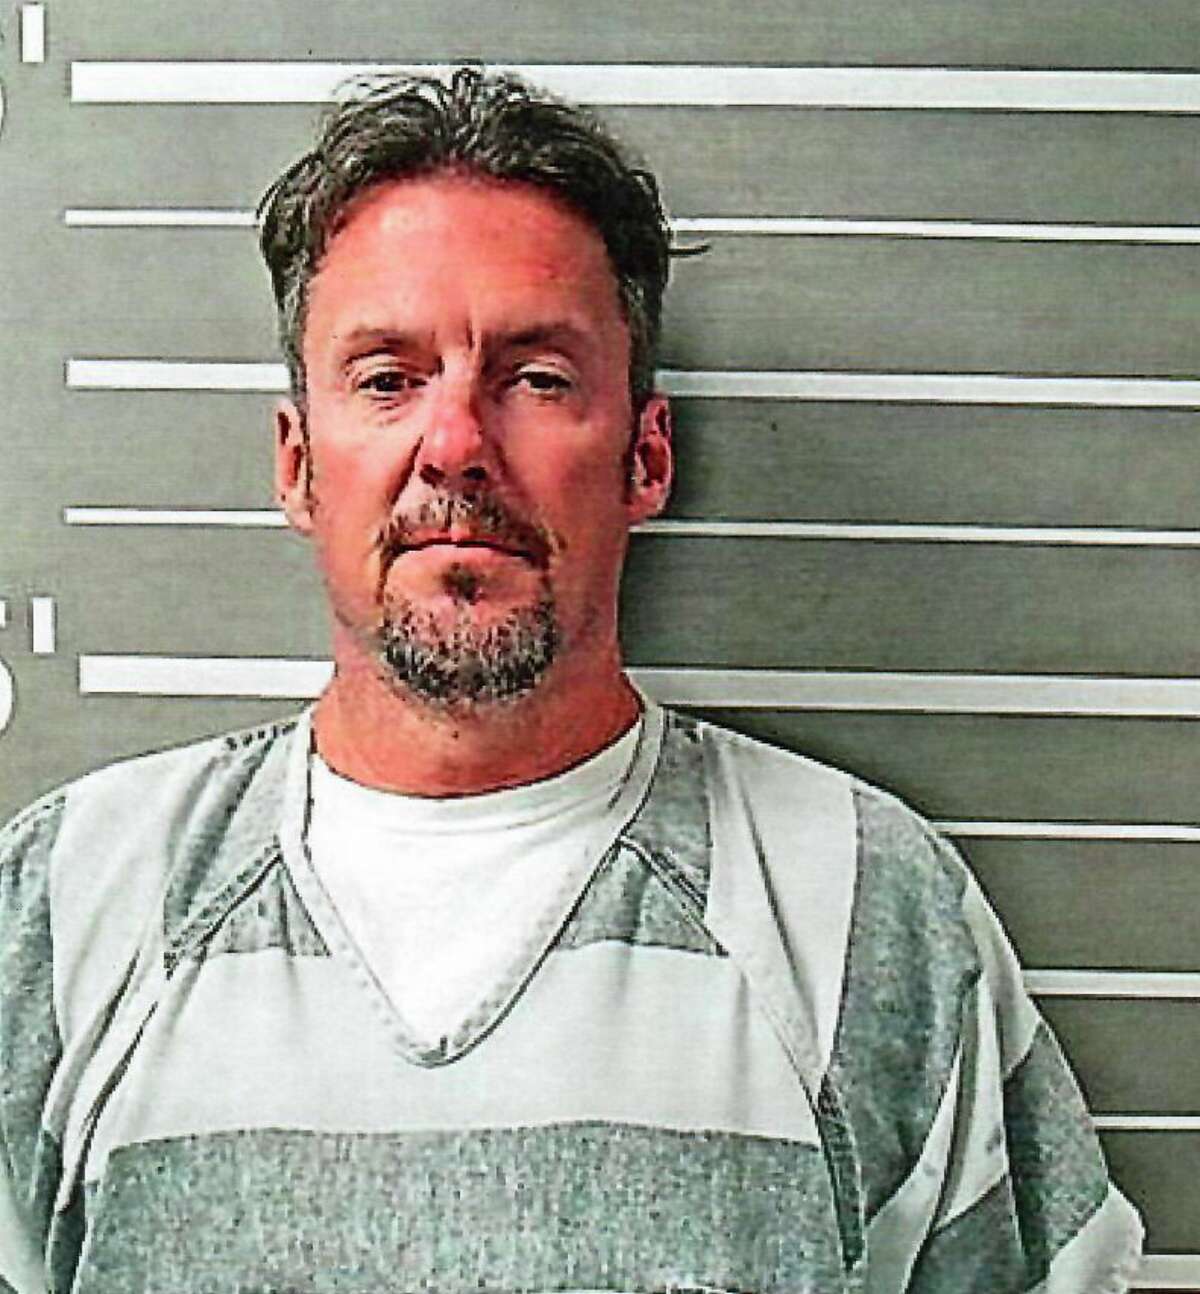 Robert “Bobby” J. Tarr, 48, of Collinsville has been arrested and charged with first degree murder in Reeves’ death.